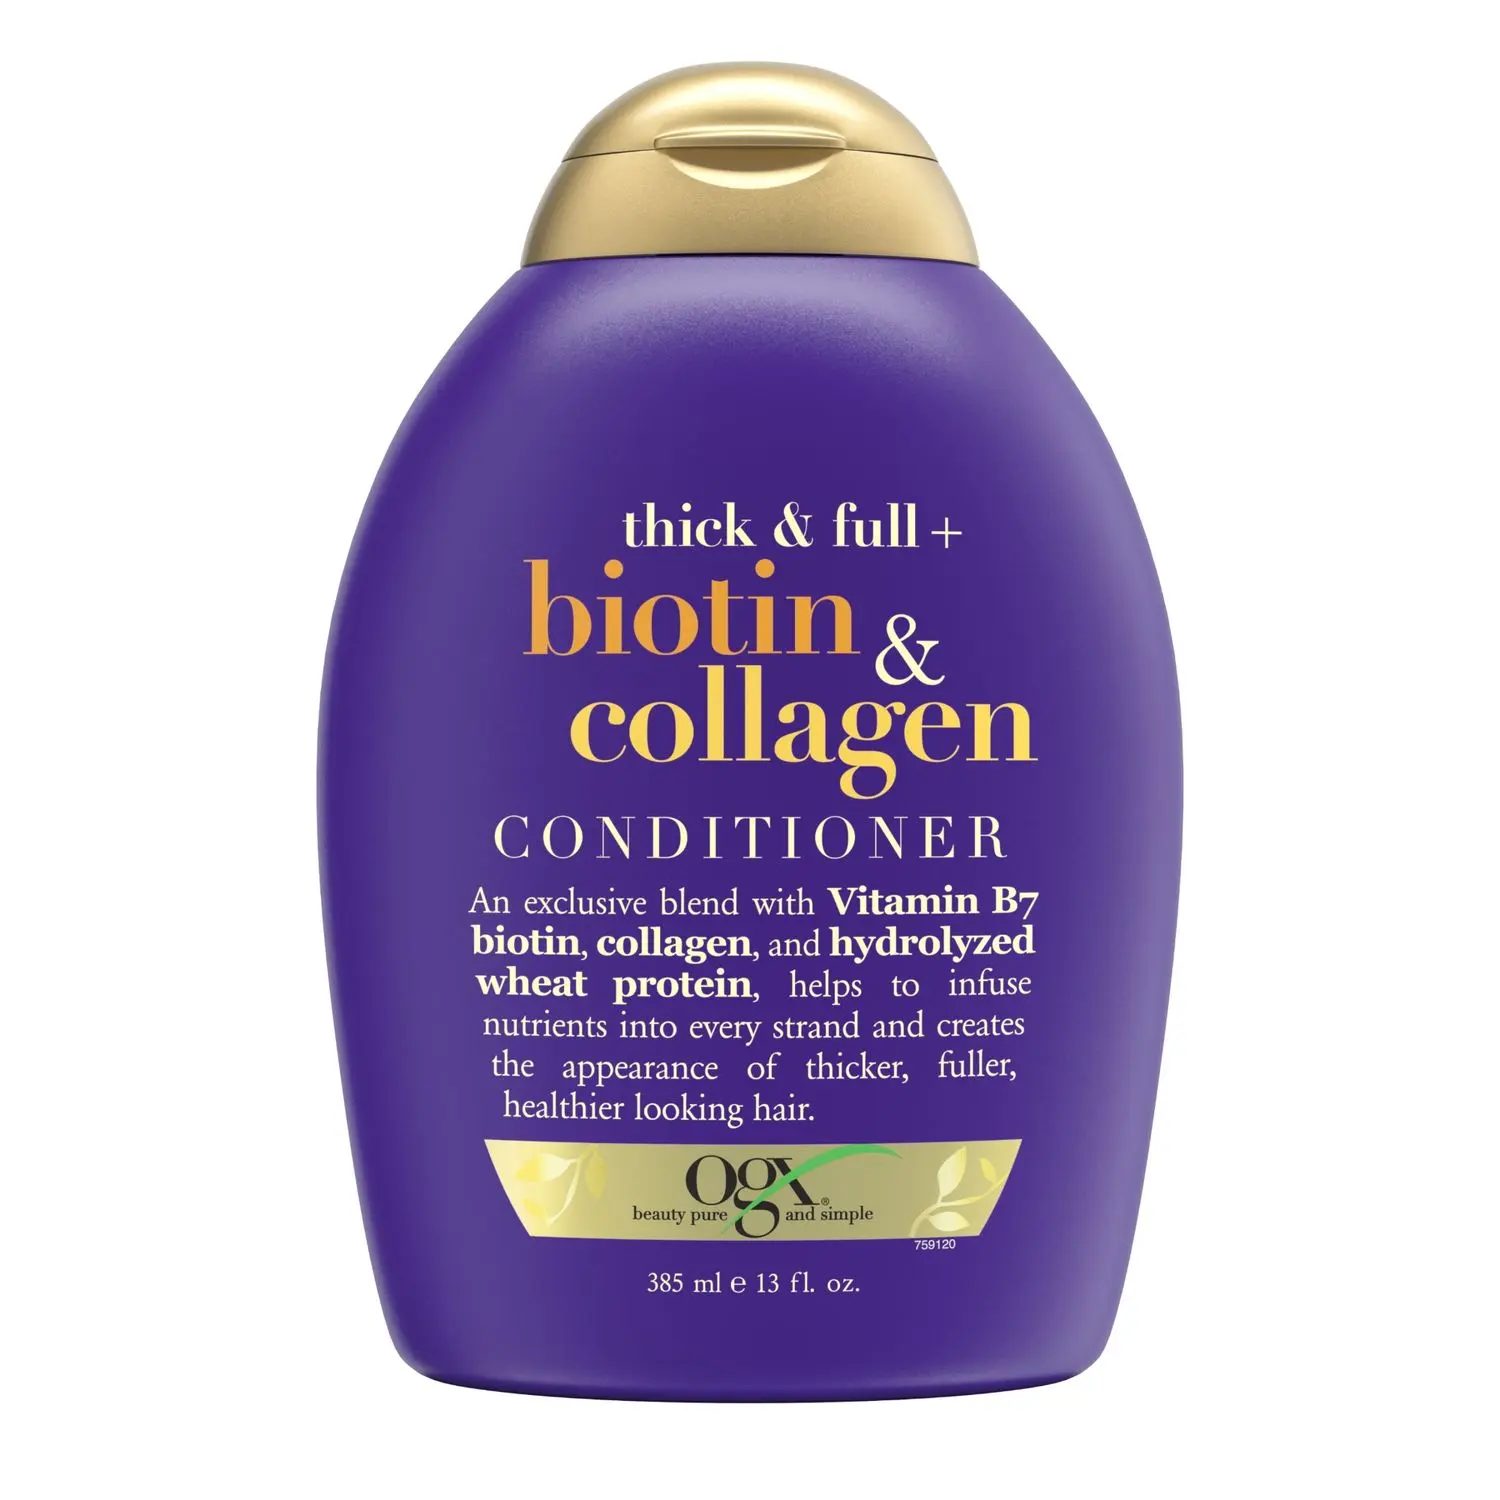 OGX Thick & Full + Biotin & Collagen Volumizing Conditioner for Thin Hair, with Vitamin B7 & Hydrolyzed Wheat Protein, Paraben-Free, Sulfate-Free Surfactants, 385ml